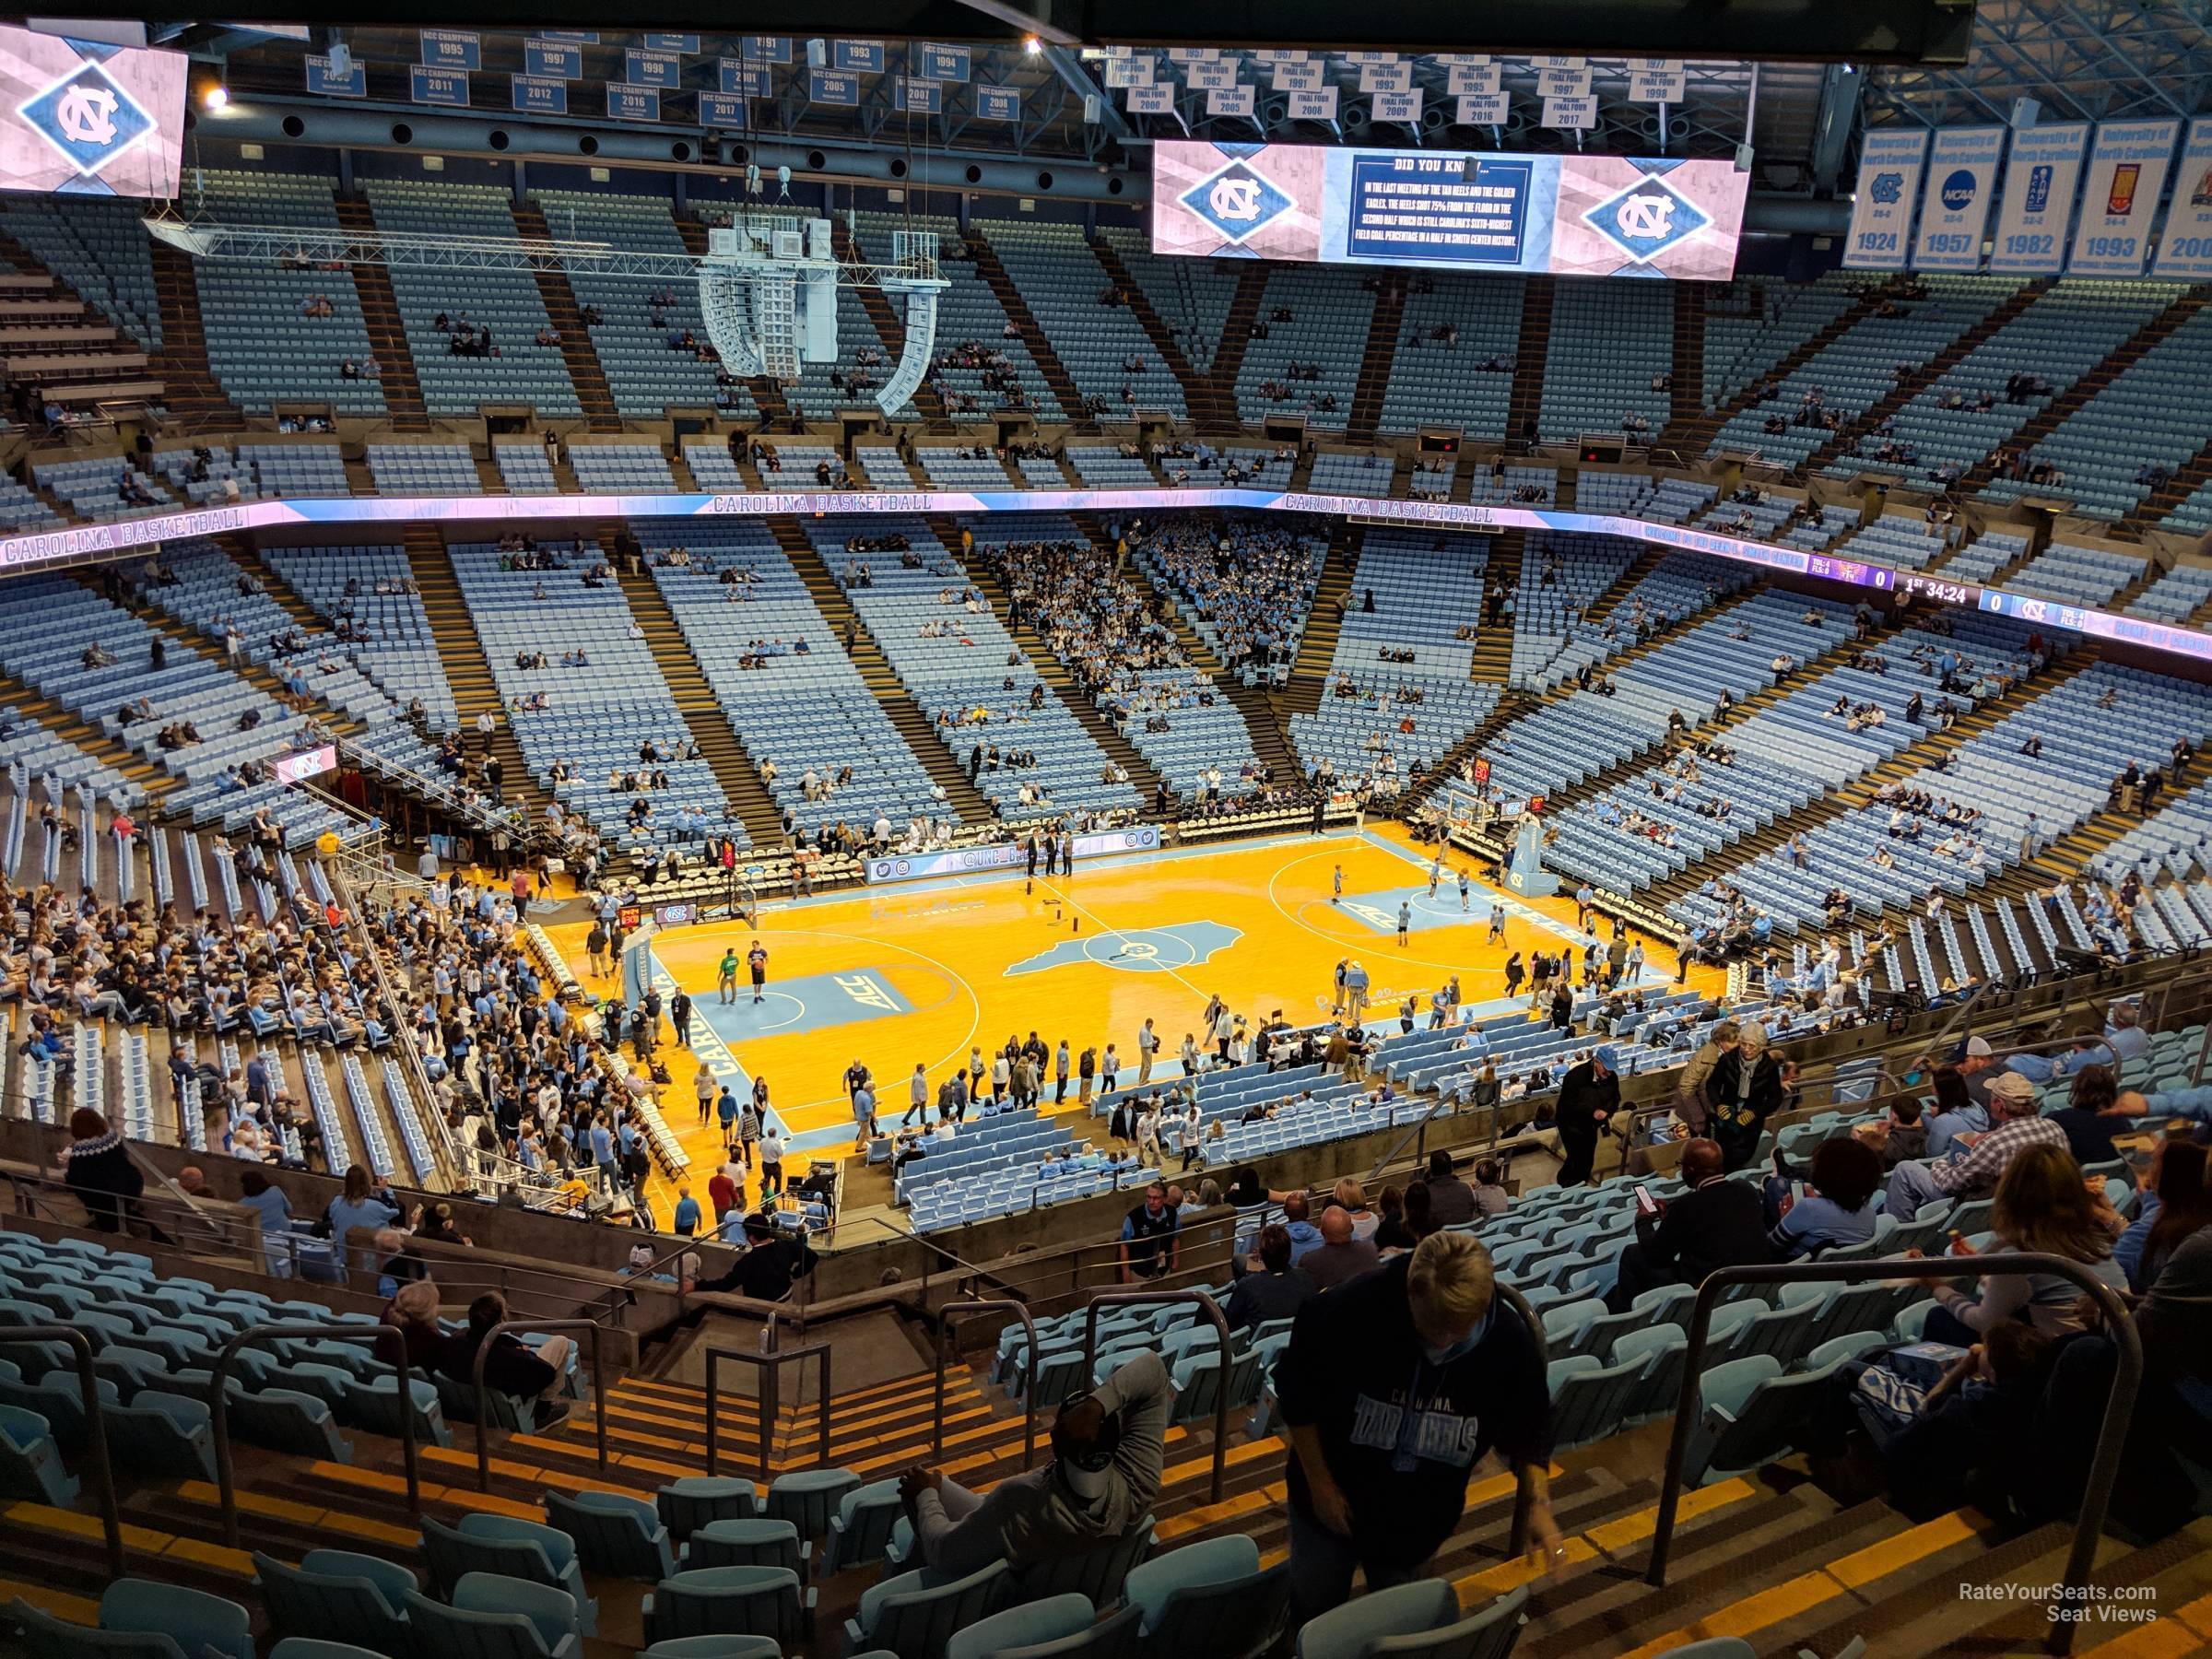 section 222a, row s seat view  - dean smith center